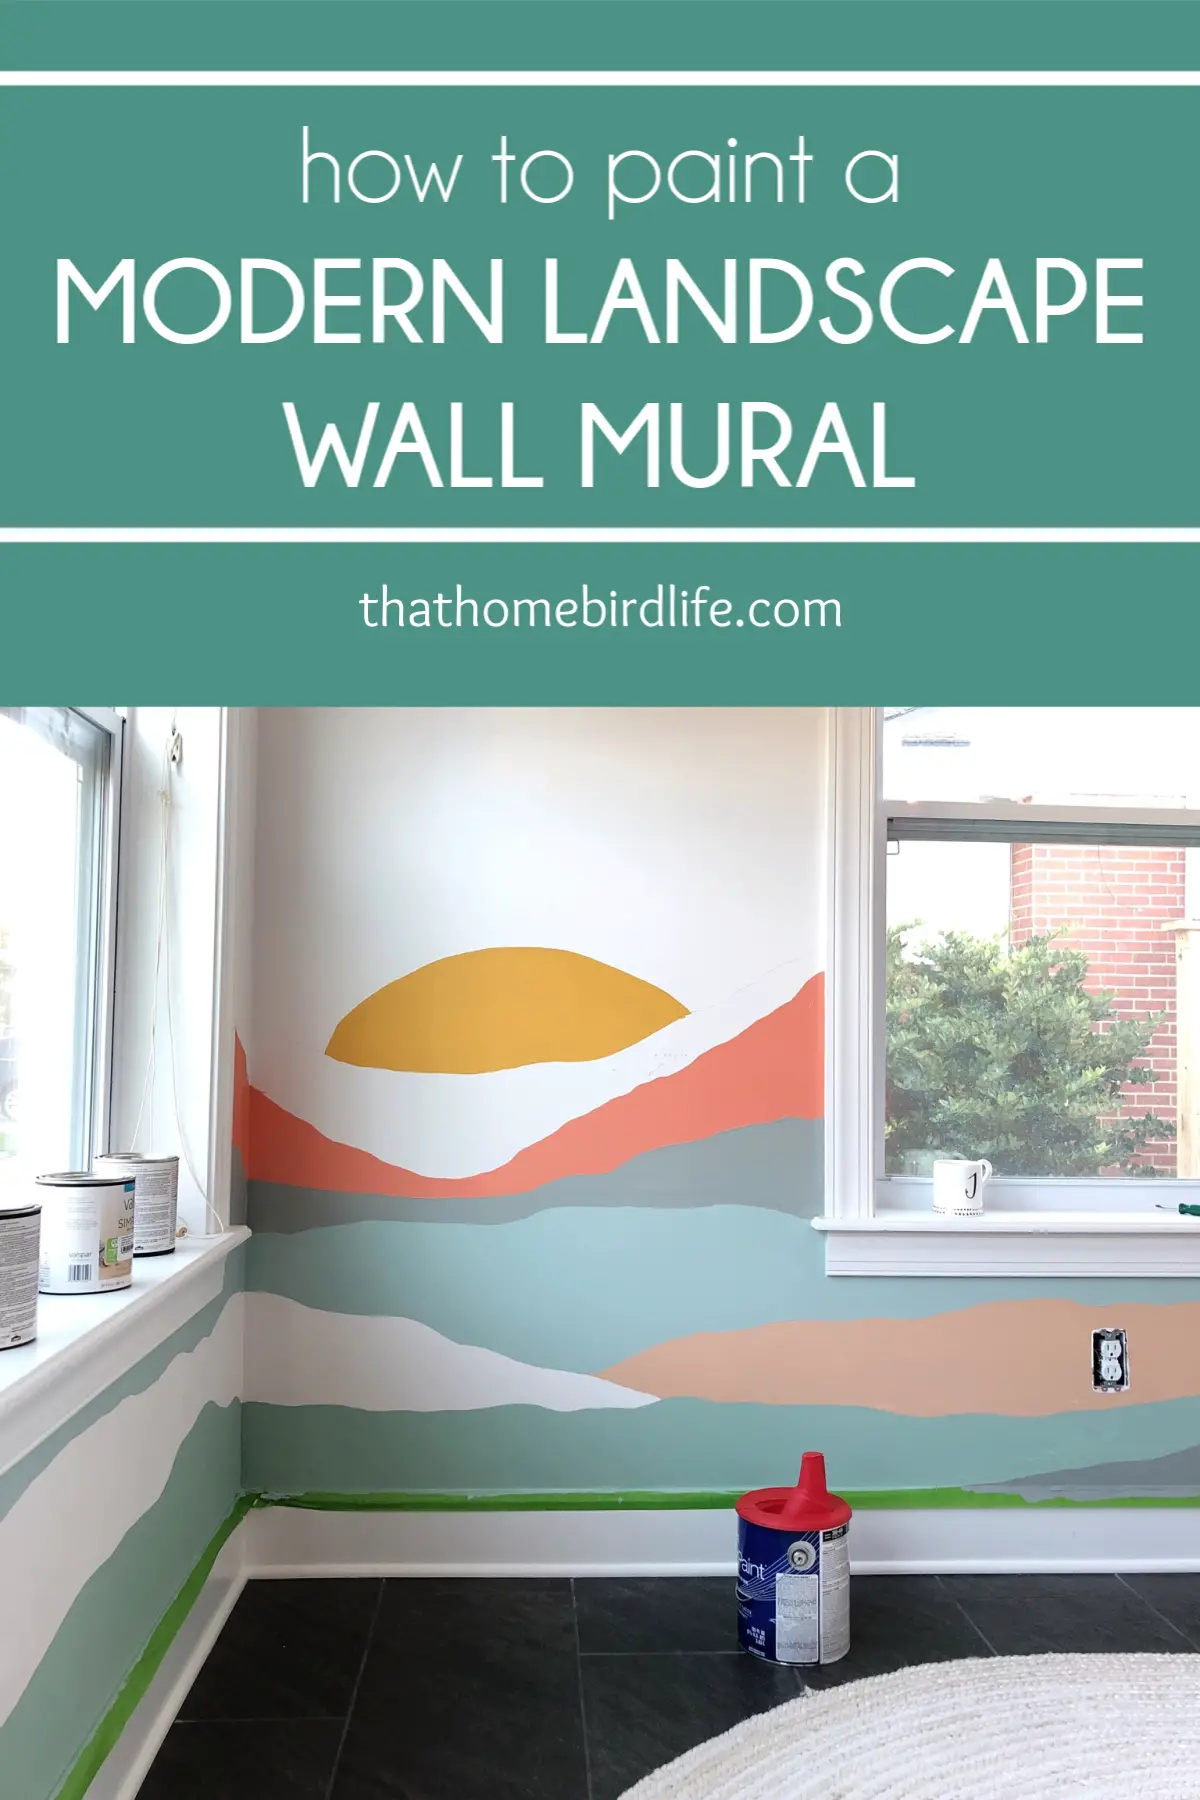 Mural with Text overlay - How To Paint a Modern Landscape Wall Mural